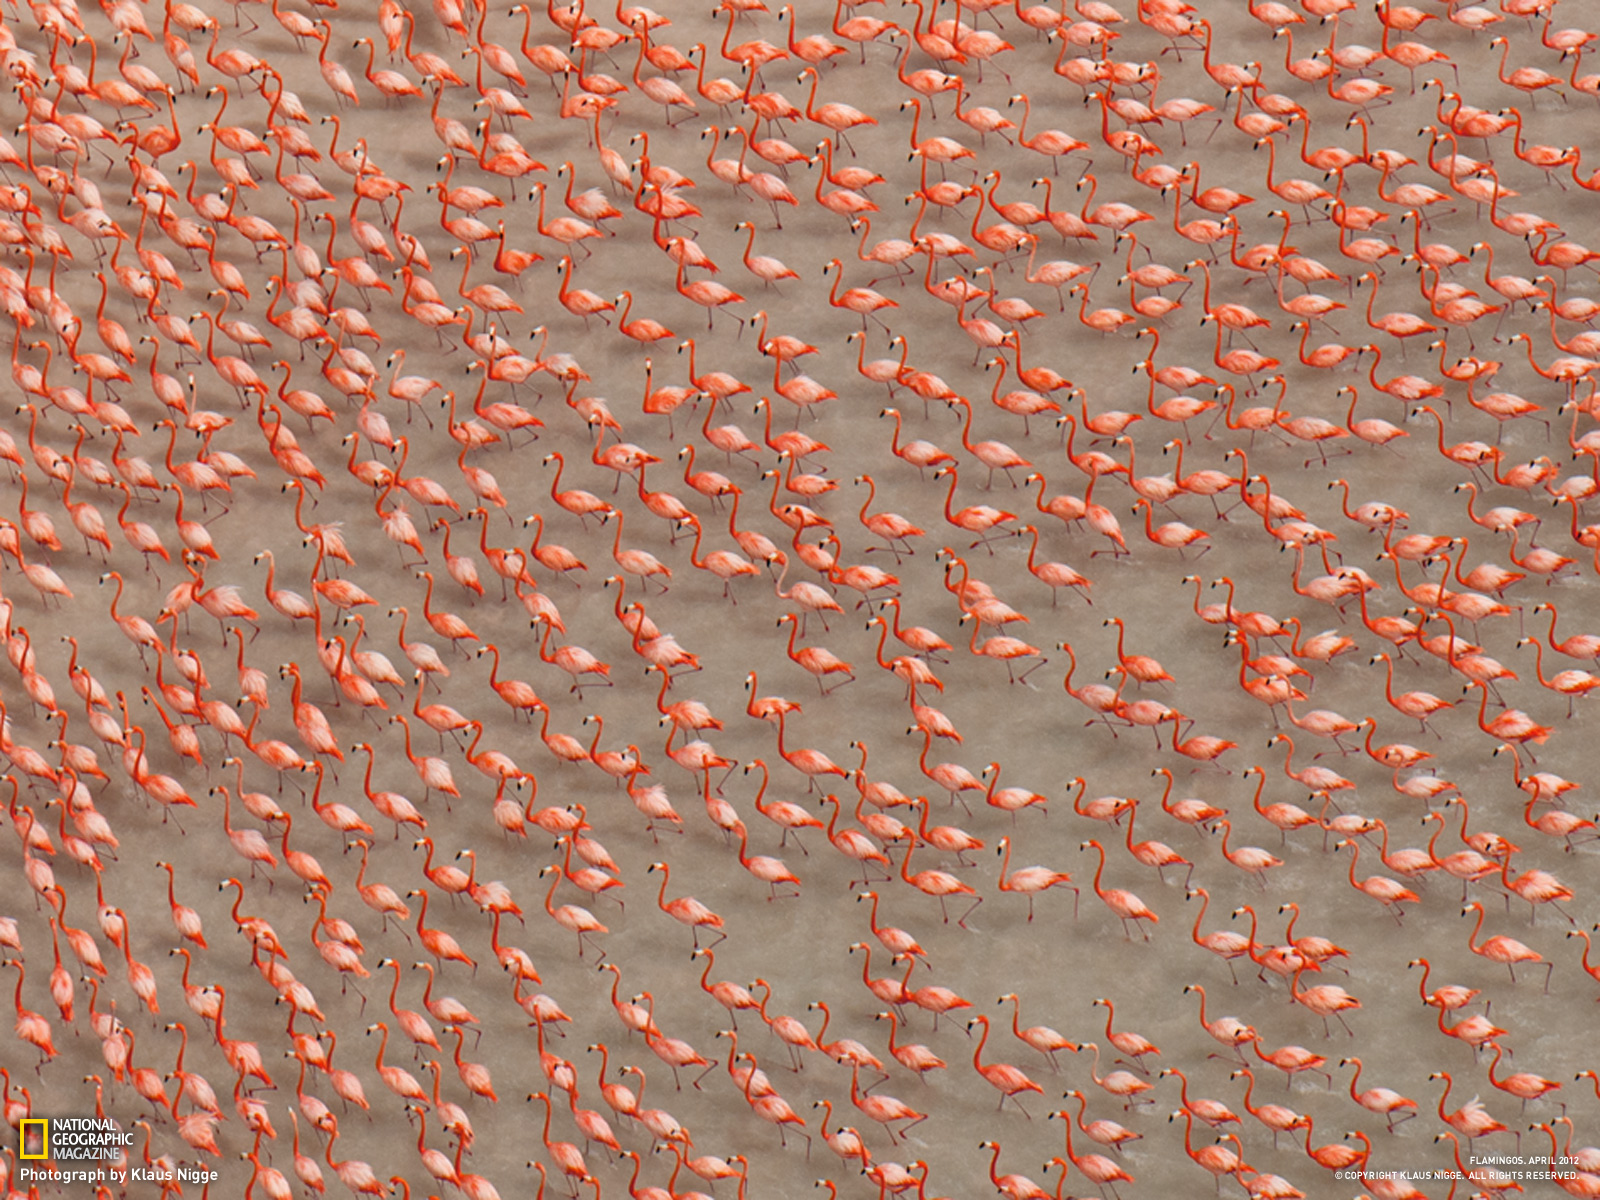 Flamingos gather to perform a courtship display on Mexicos Yucatn